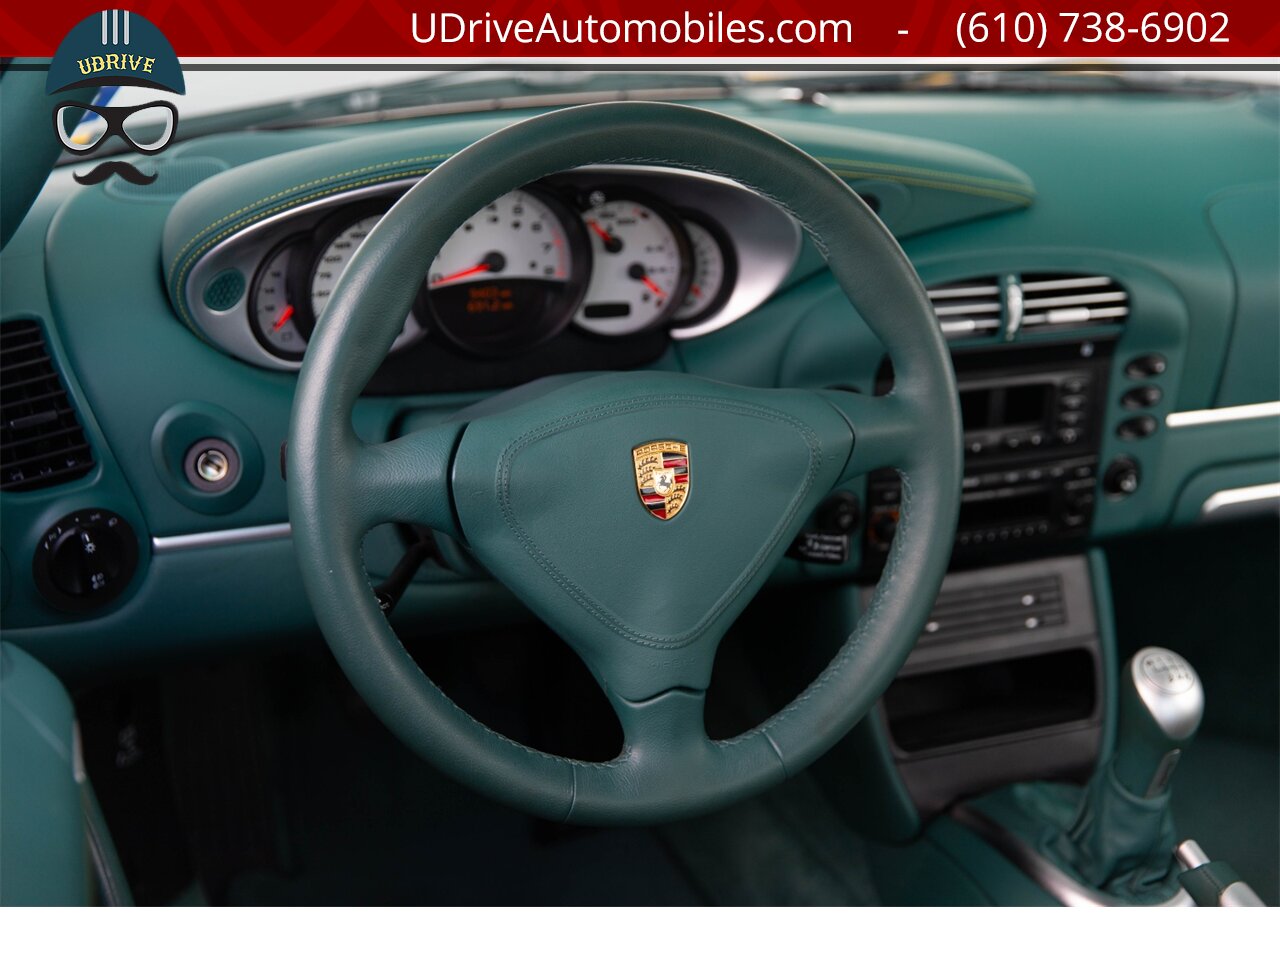 2003 Porsche 911 996 Turbo X50 6Sp Nephrite Green Lthr 9k Miles  Deviating Yellow Stitching Collector Grade BACK AGAIN - Photo 29 - West Chester, PA 19382